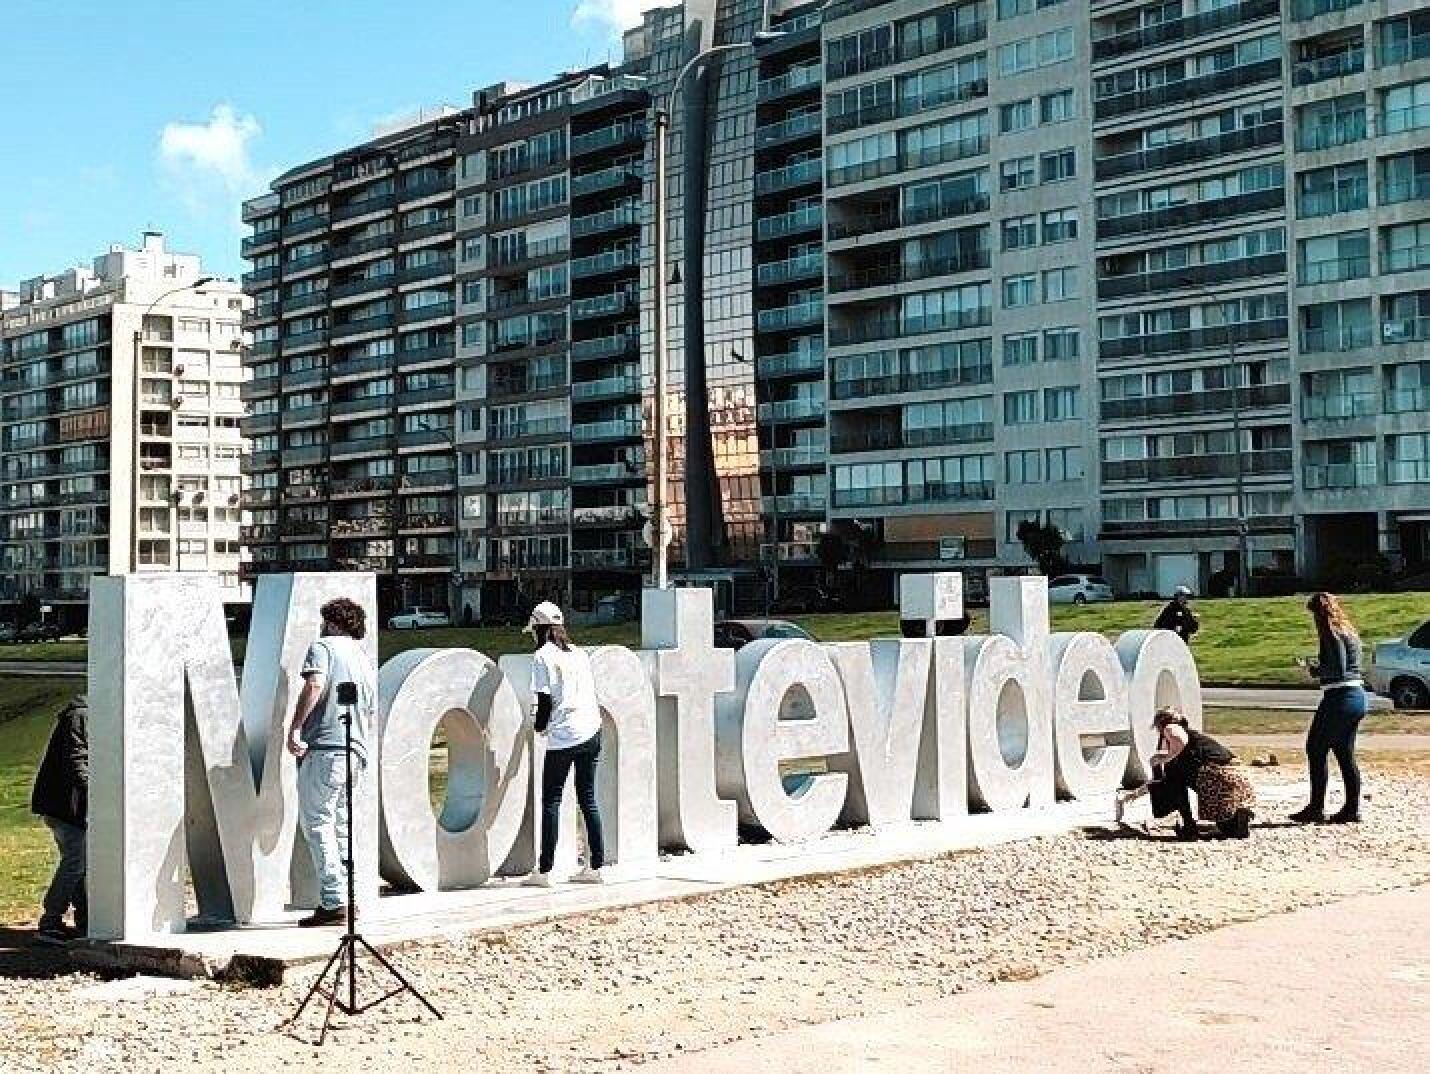 AFAP SURA joined the Montevideo Plateado initiative